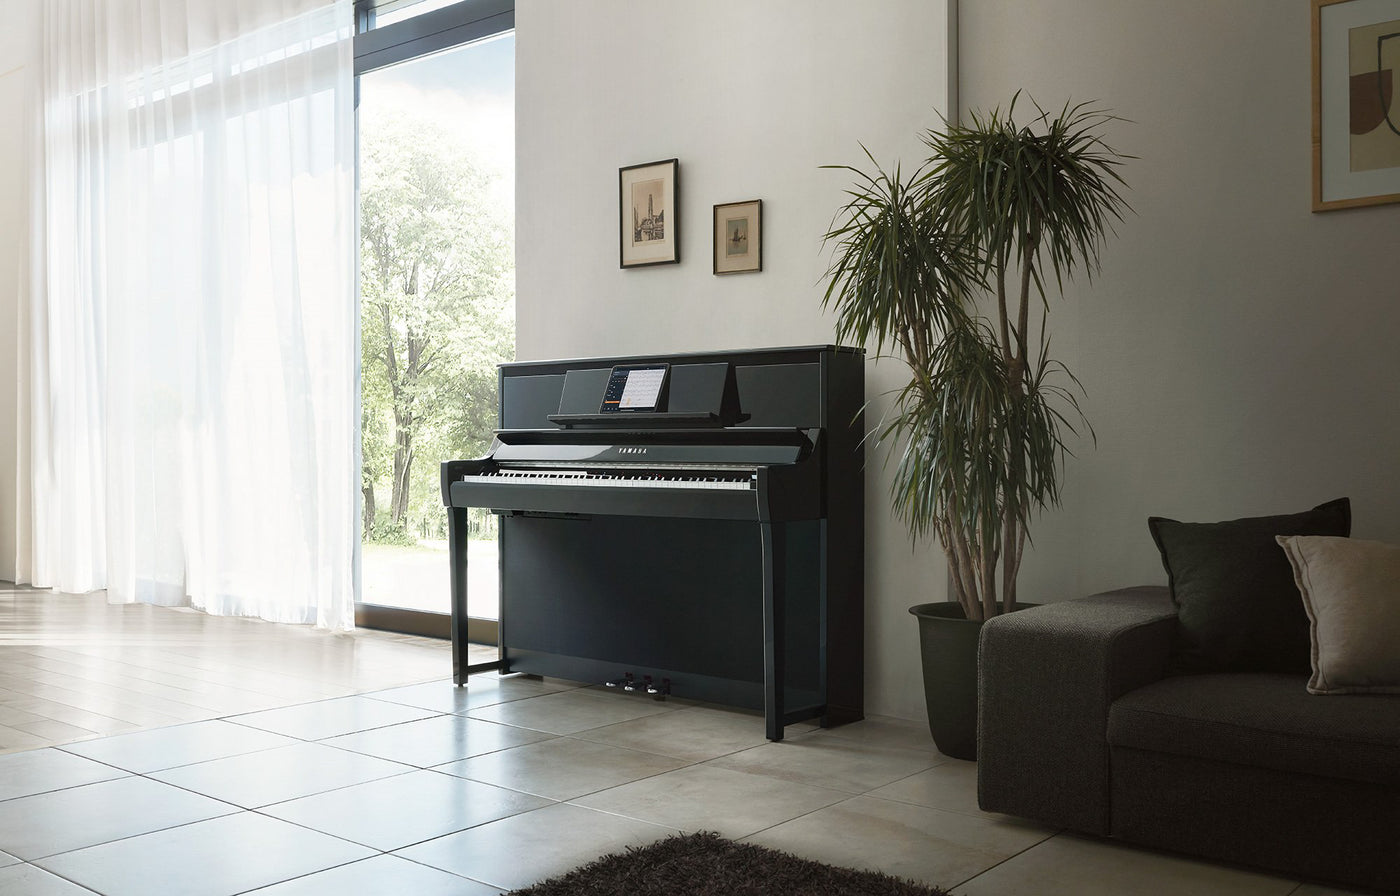 A modern digital piano in a bright living room with large windows, set against a matte wall, adjacent to a plush sofa and an indoor potted plant.